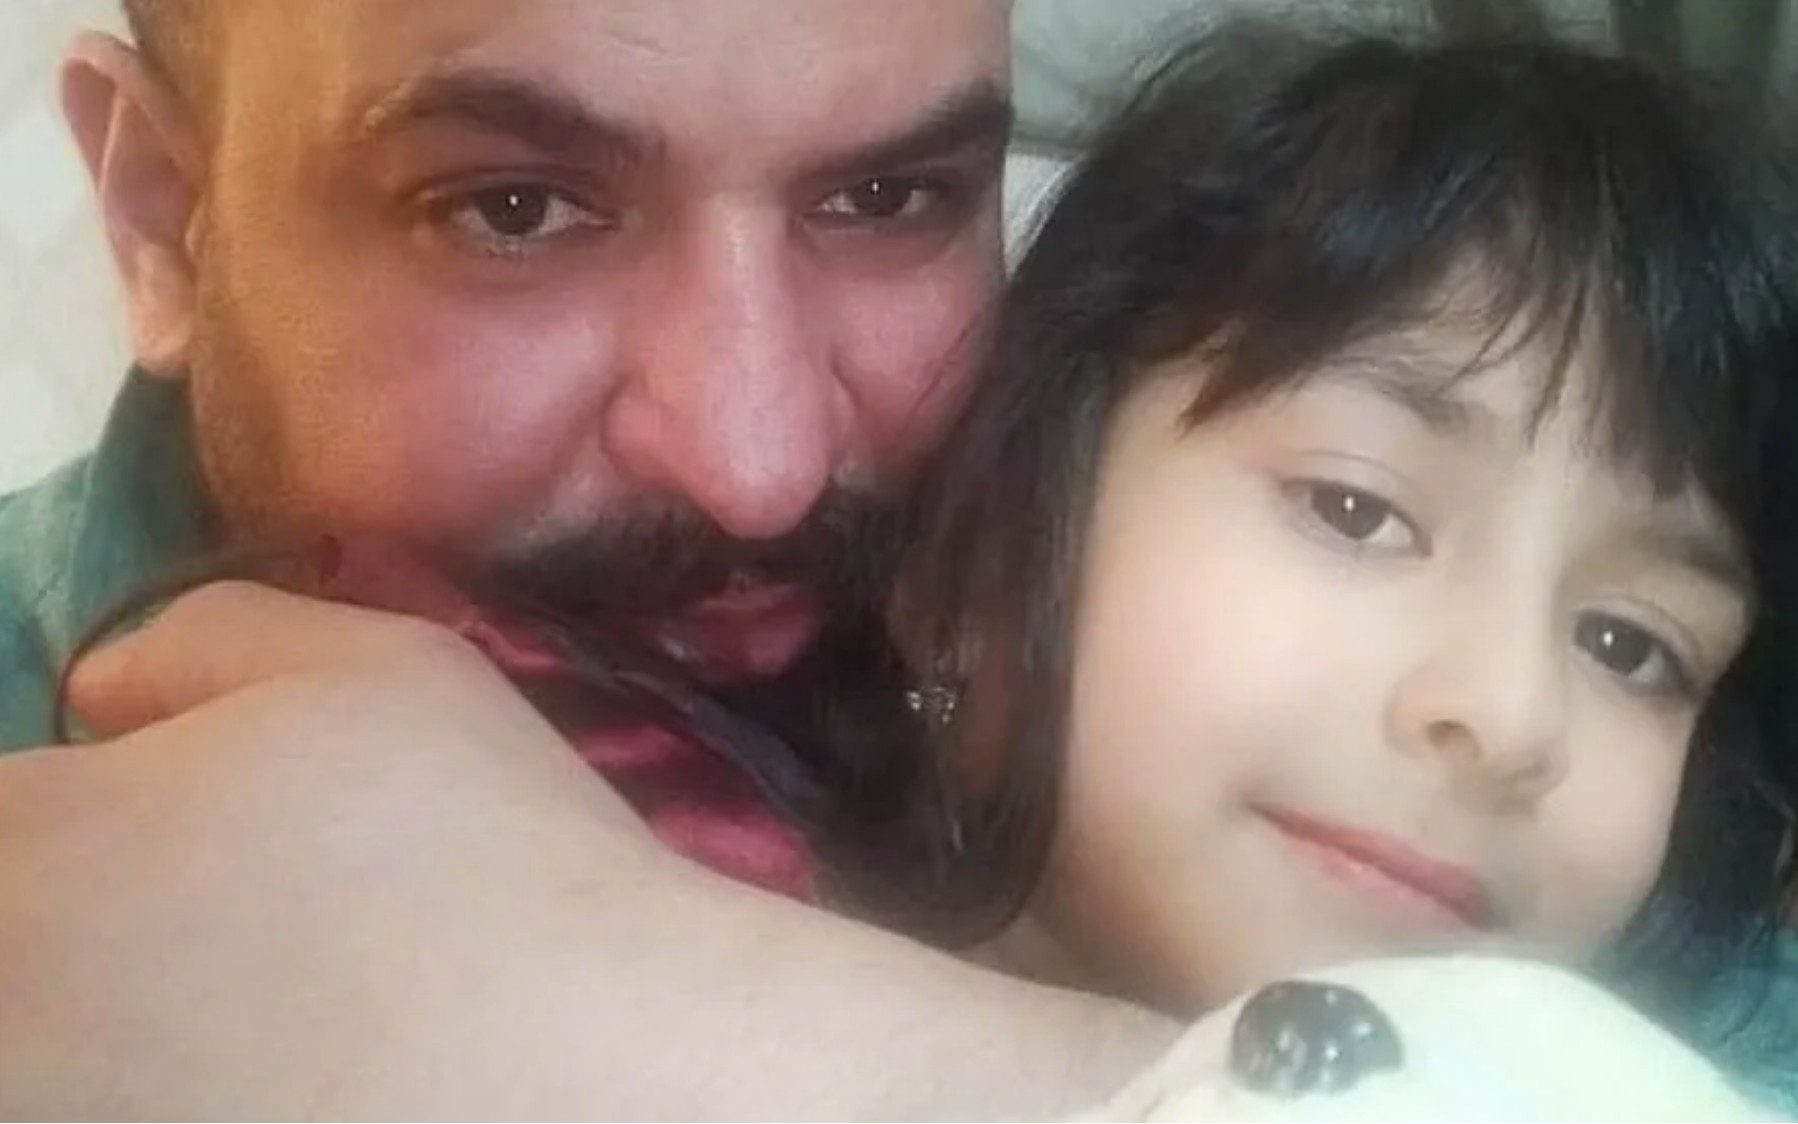 father ‘will never forgive himself’ after seeing daughter, 7, die on migrant boat